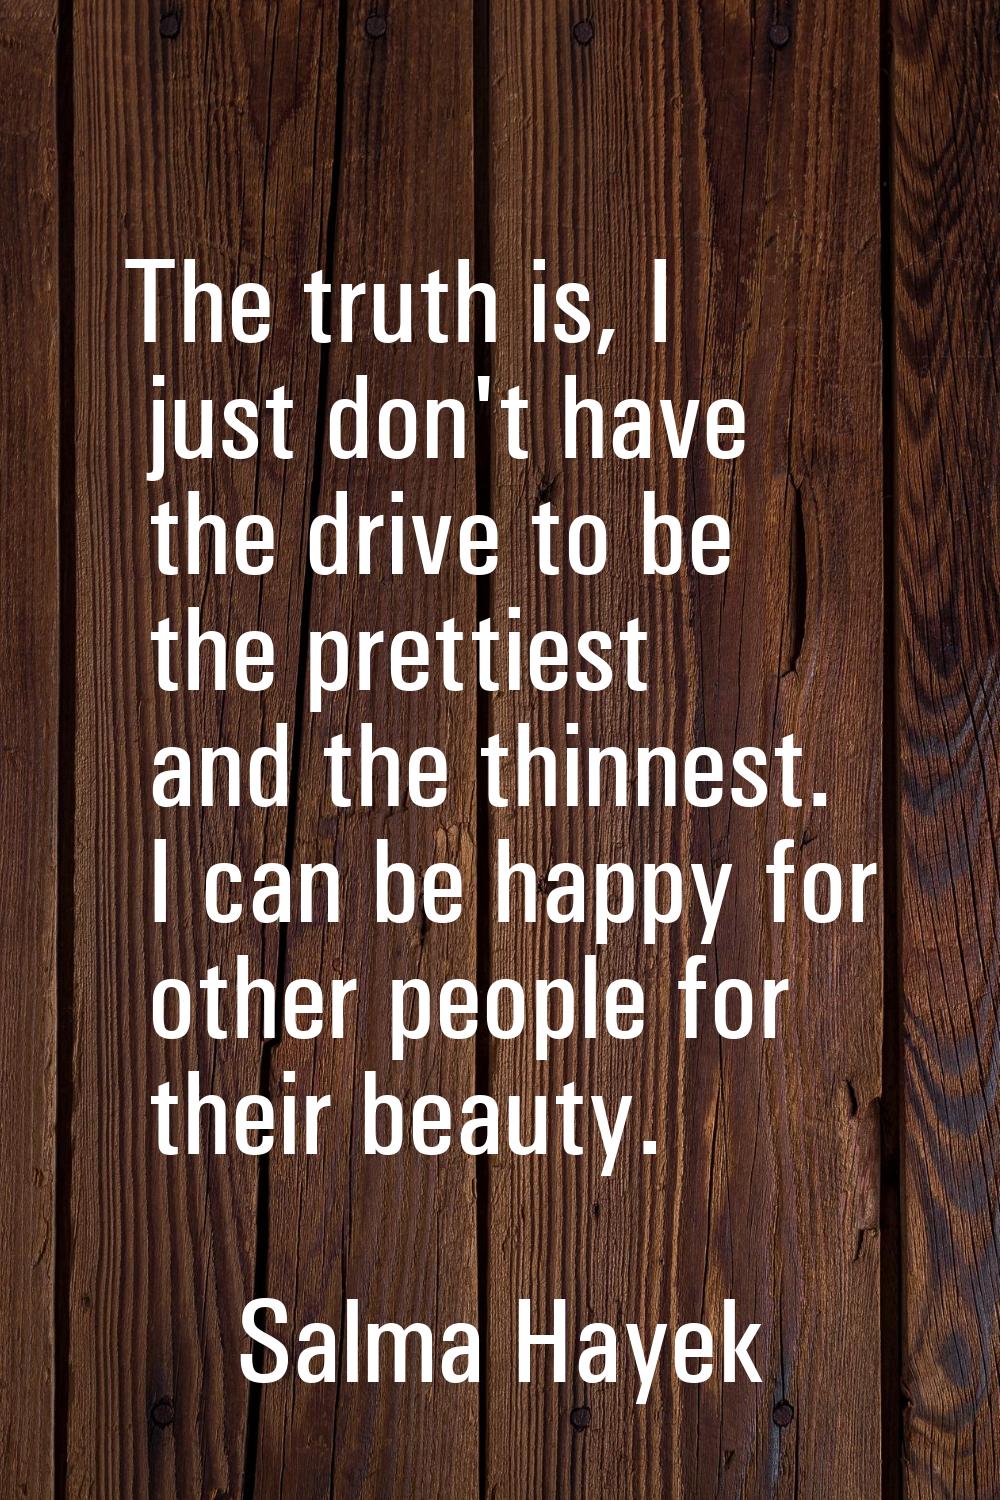 The truth is, I just don't have the drive to be the prettiest and the thinnest. I can be happy for 